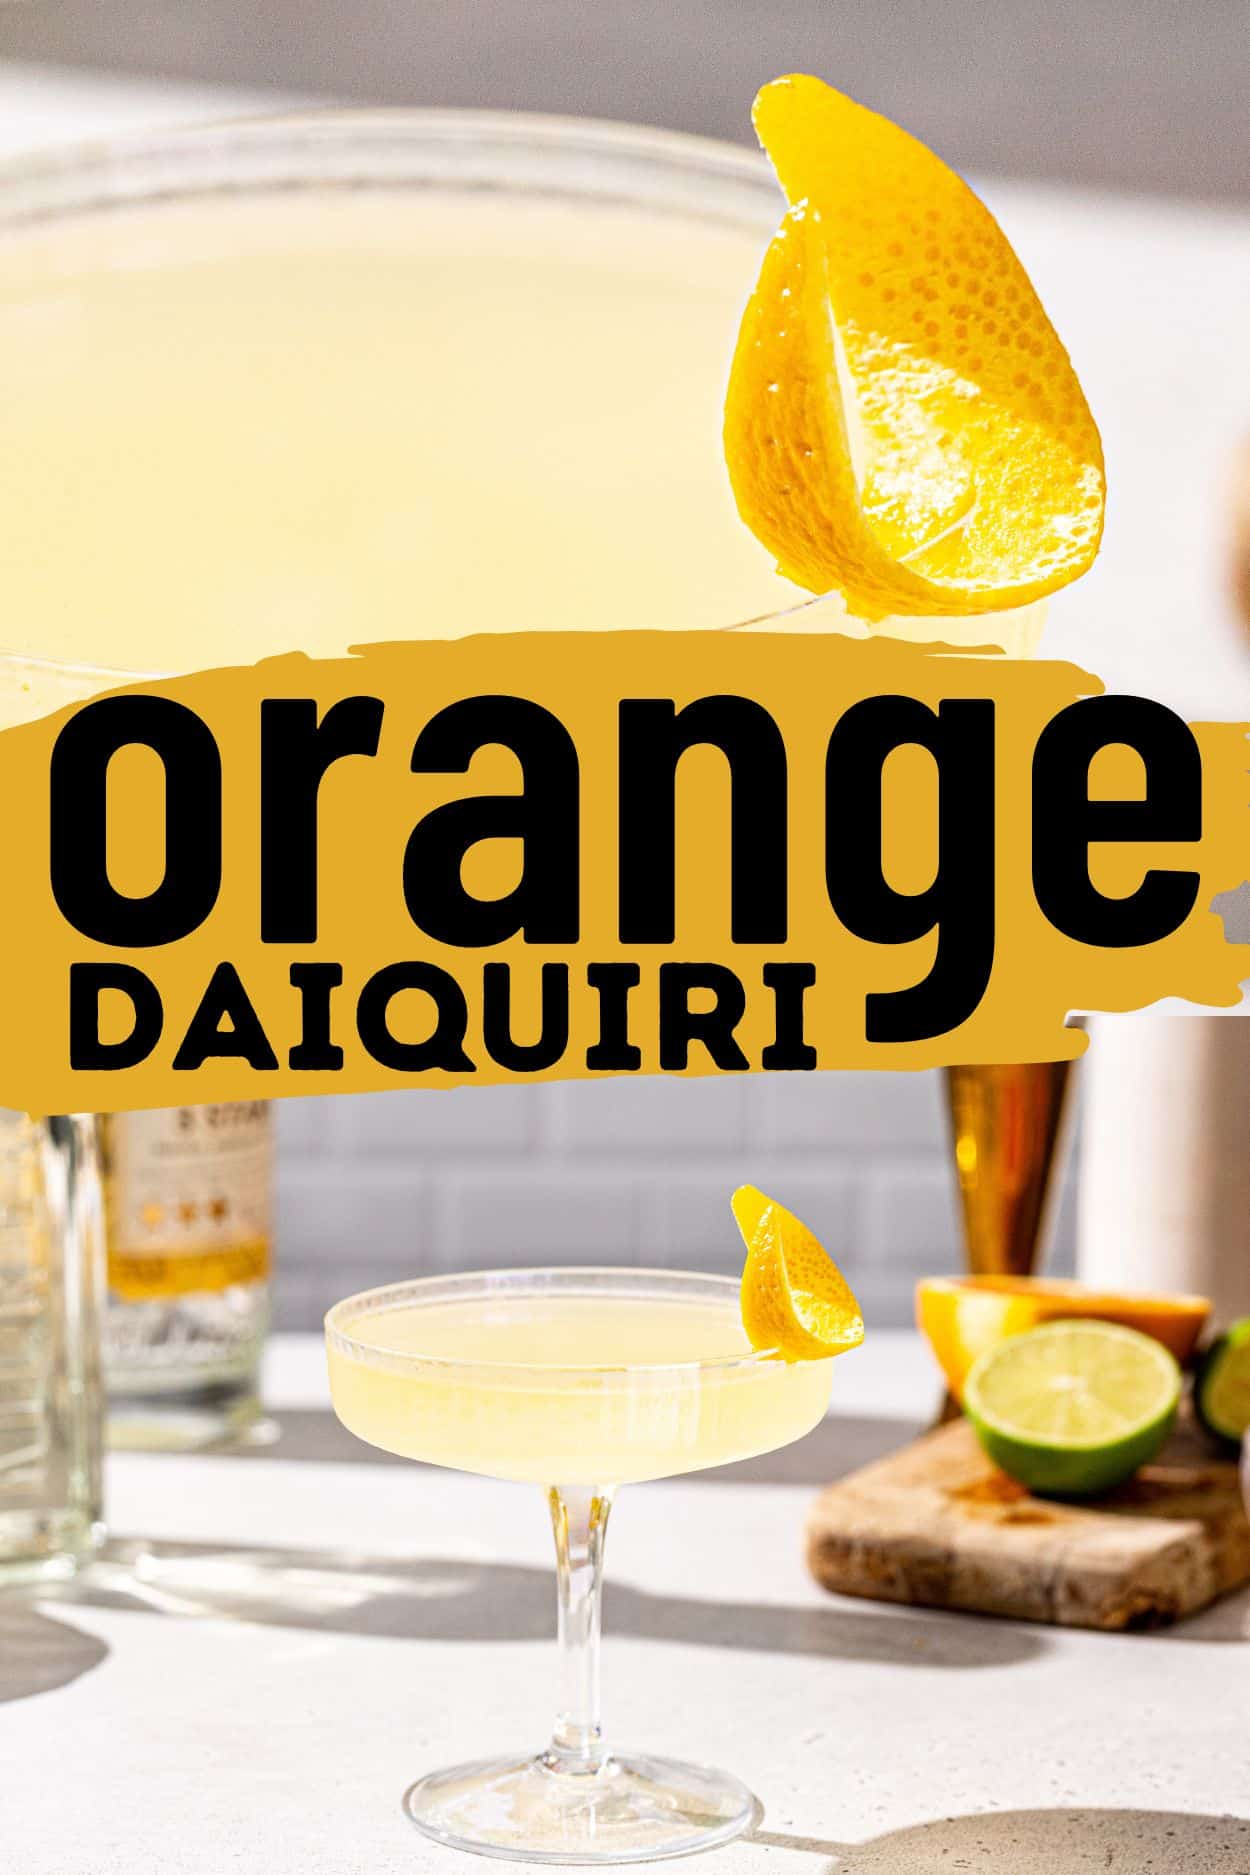 Close up view of Orange Daiquiri cocktail at the top with a pulled out view on the bottom showing the white rum, orange and lime used to make it. Text overlay in the middle says “orange daiquiri” in bold letters.